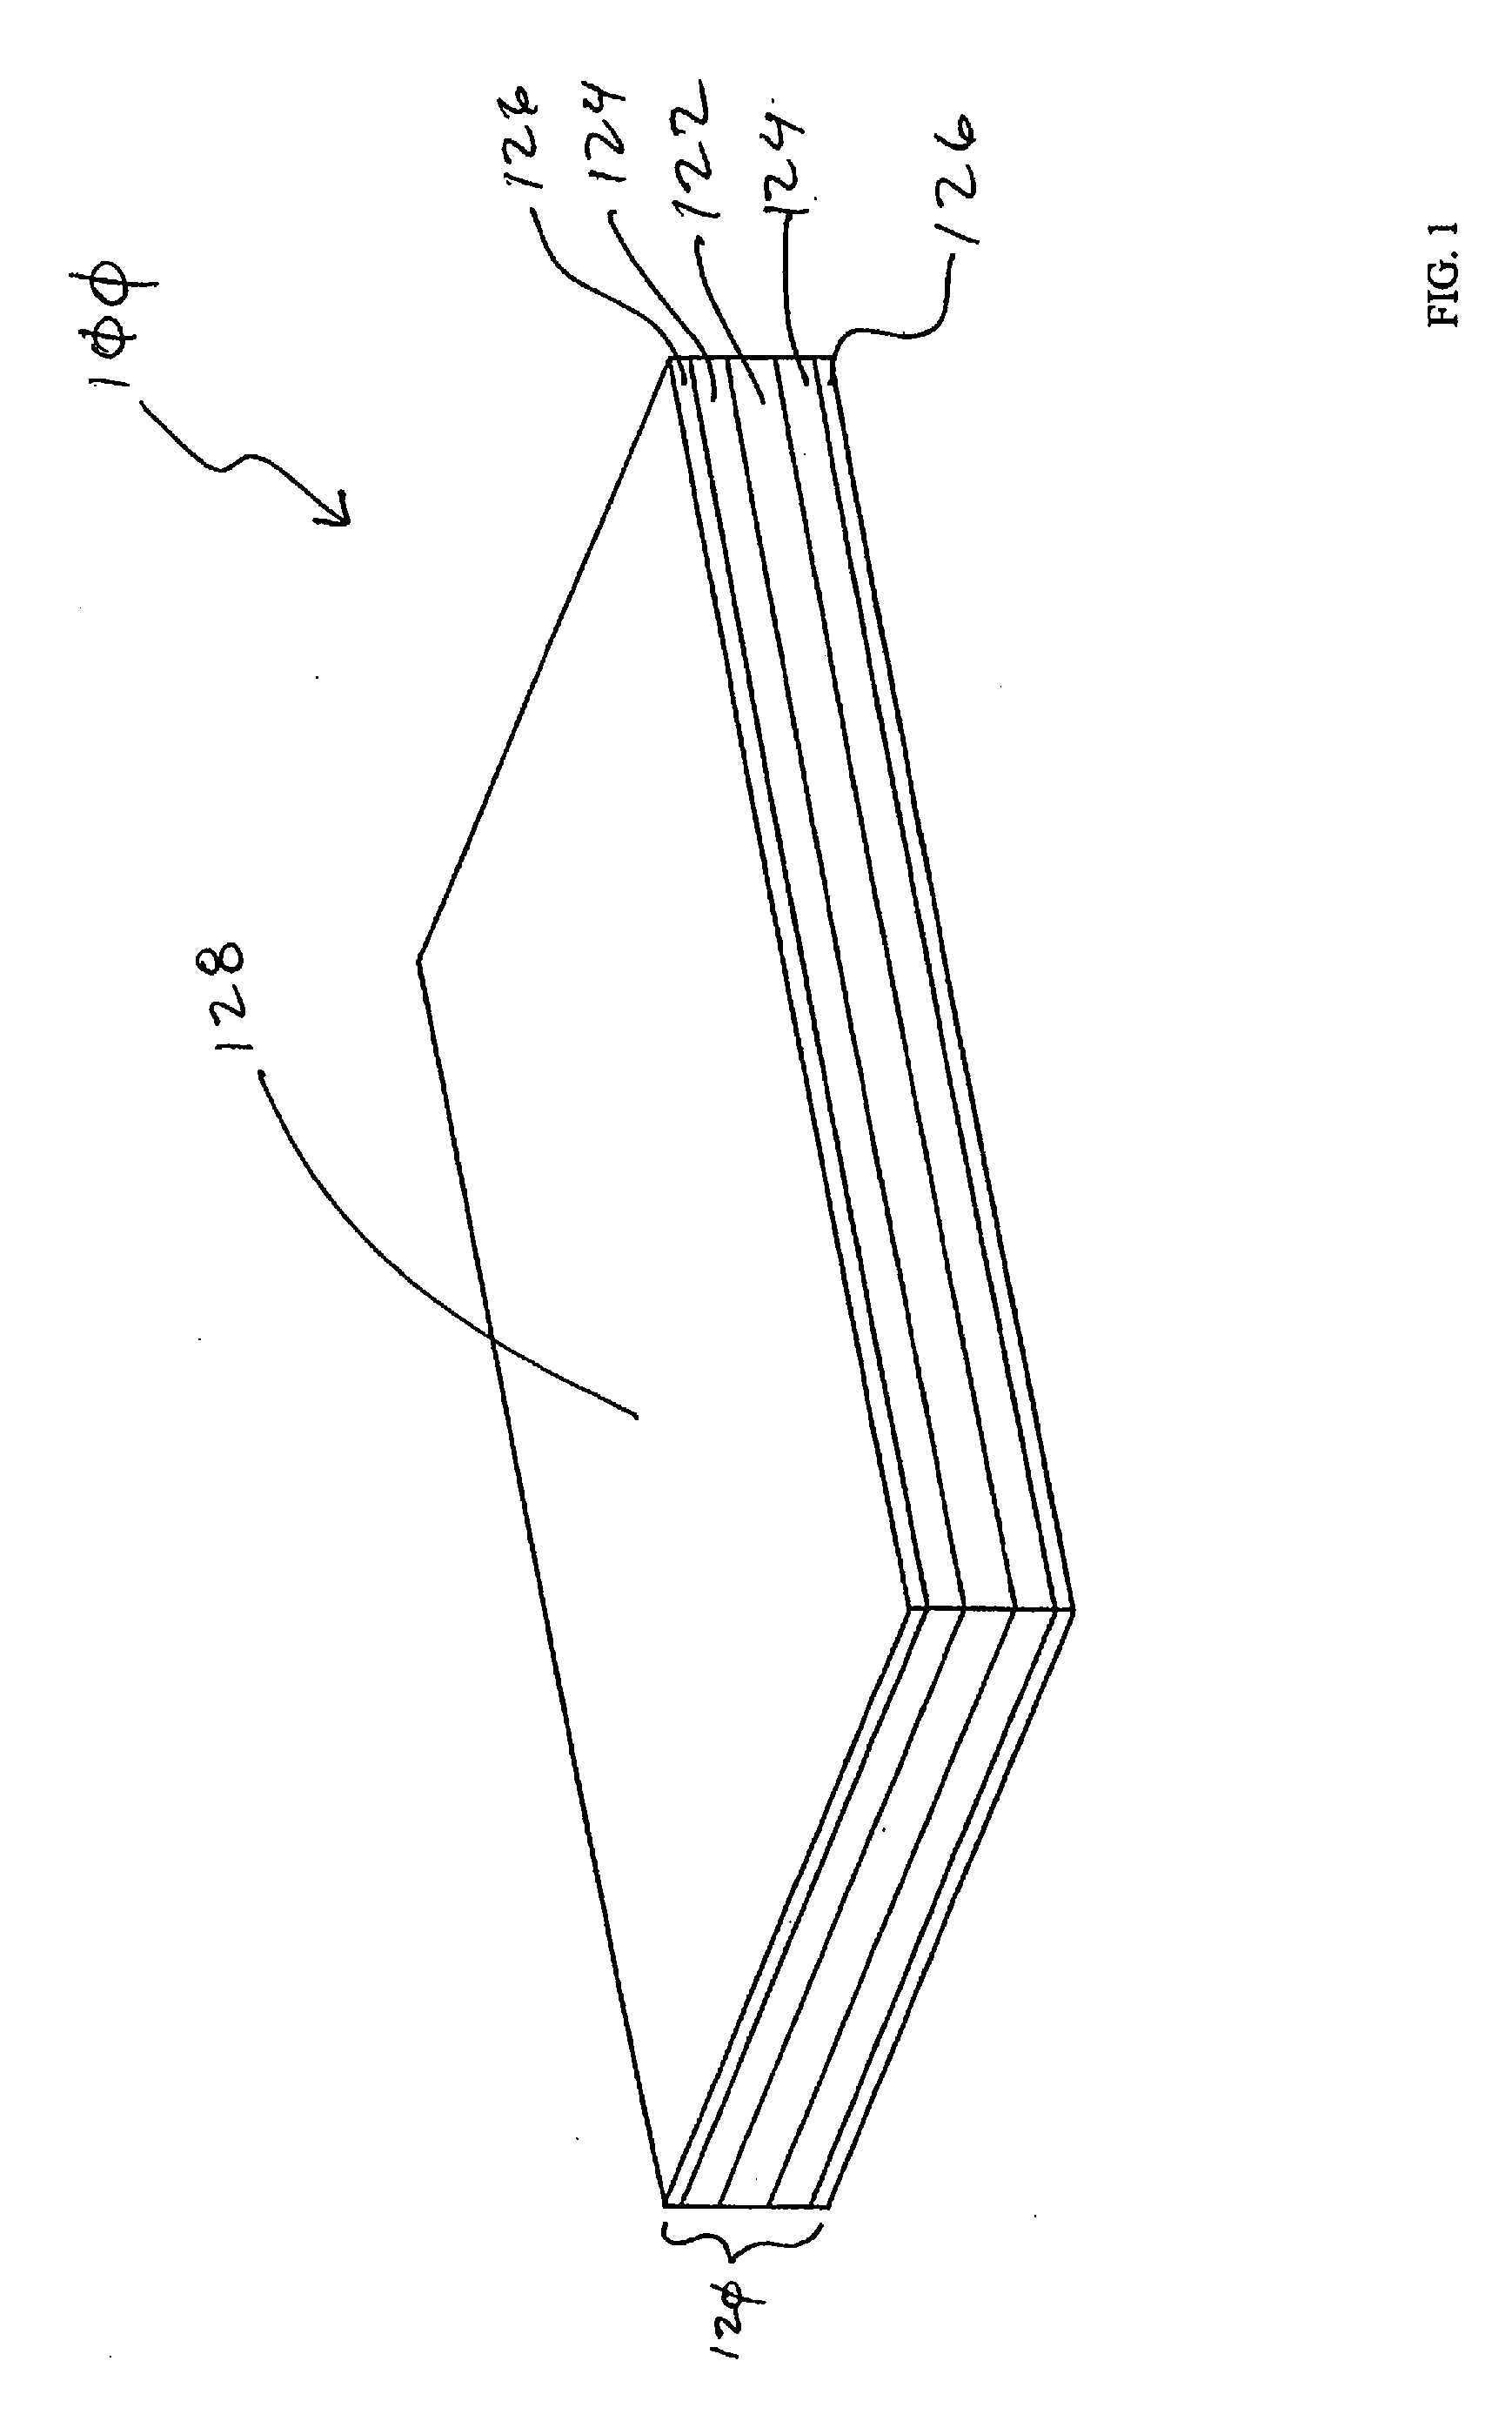 Tension relieving body support apparatus